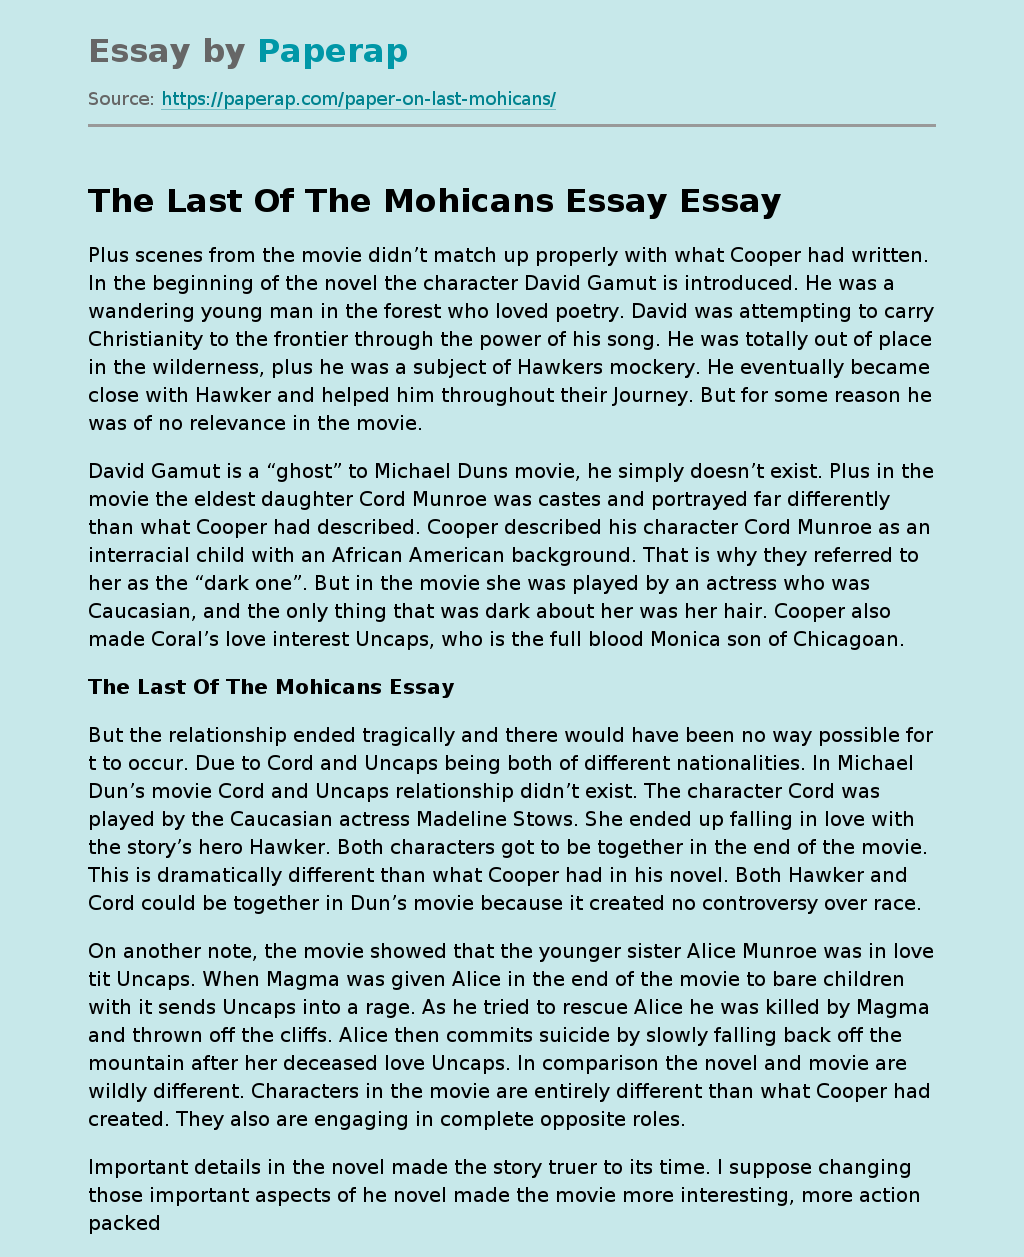 The Last Of The Mohicans Essay